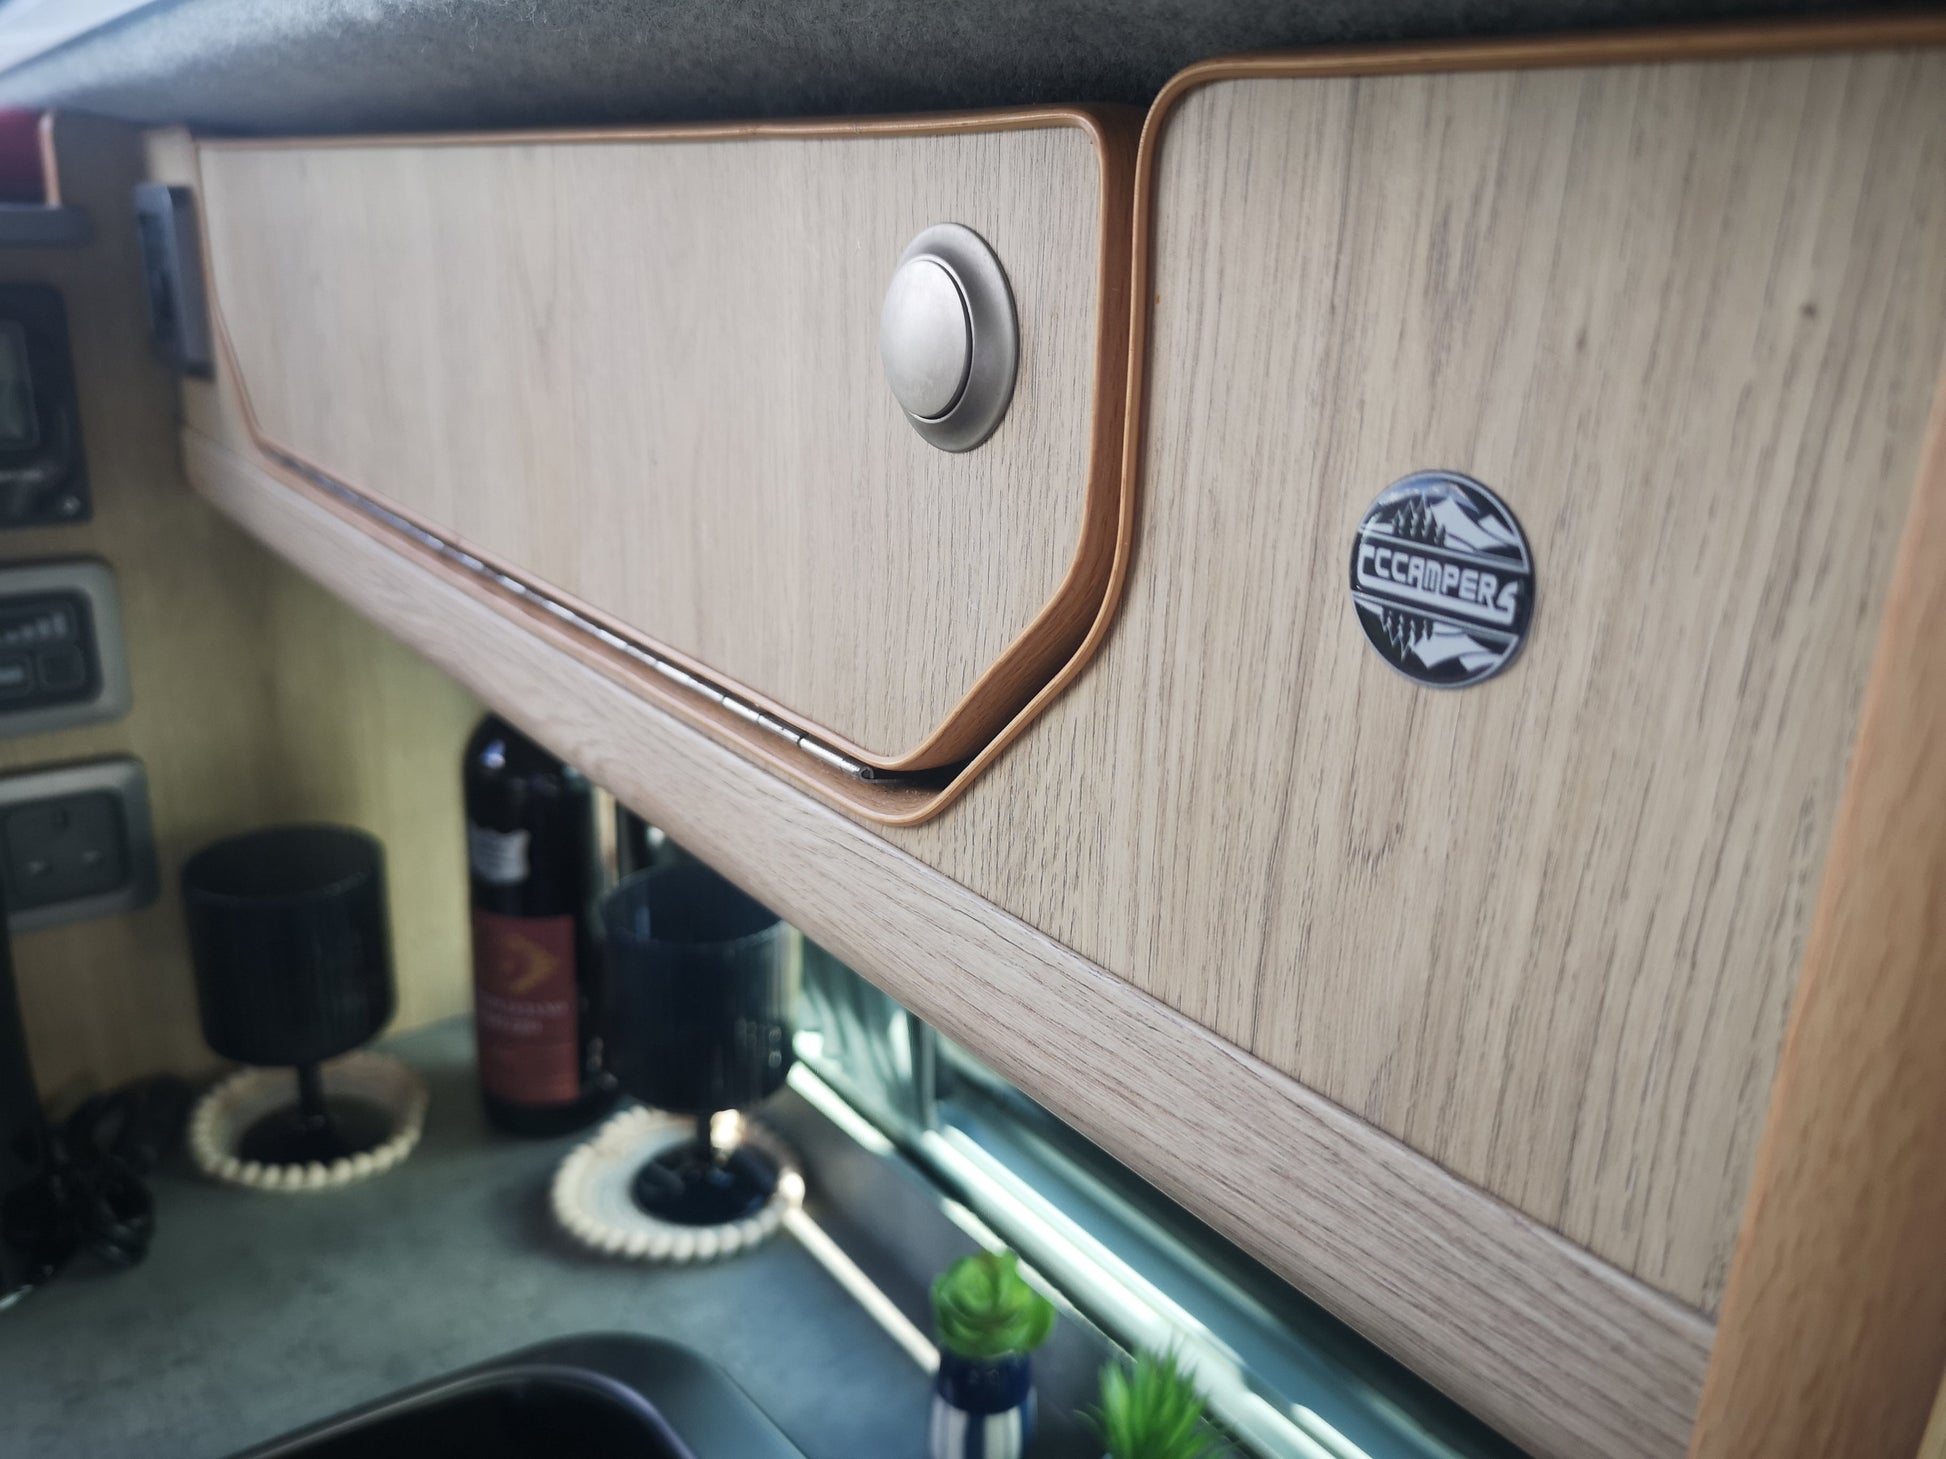 'Mamble' Camper van Conversion for the Renault Trafic, Nissan NV300 & Fiat Talento - cccampers.myshopify.com